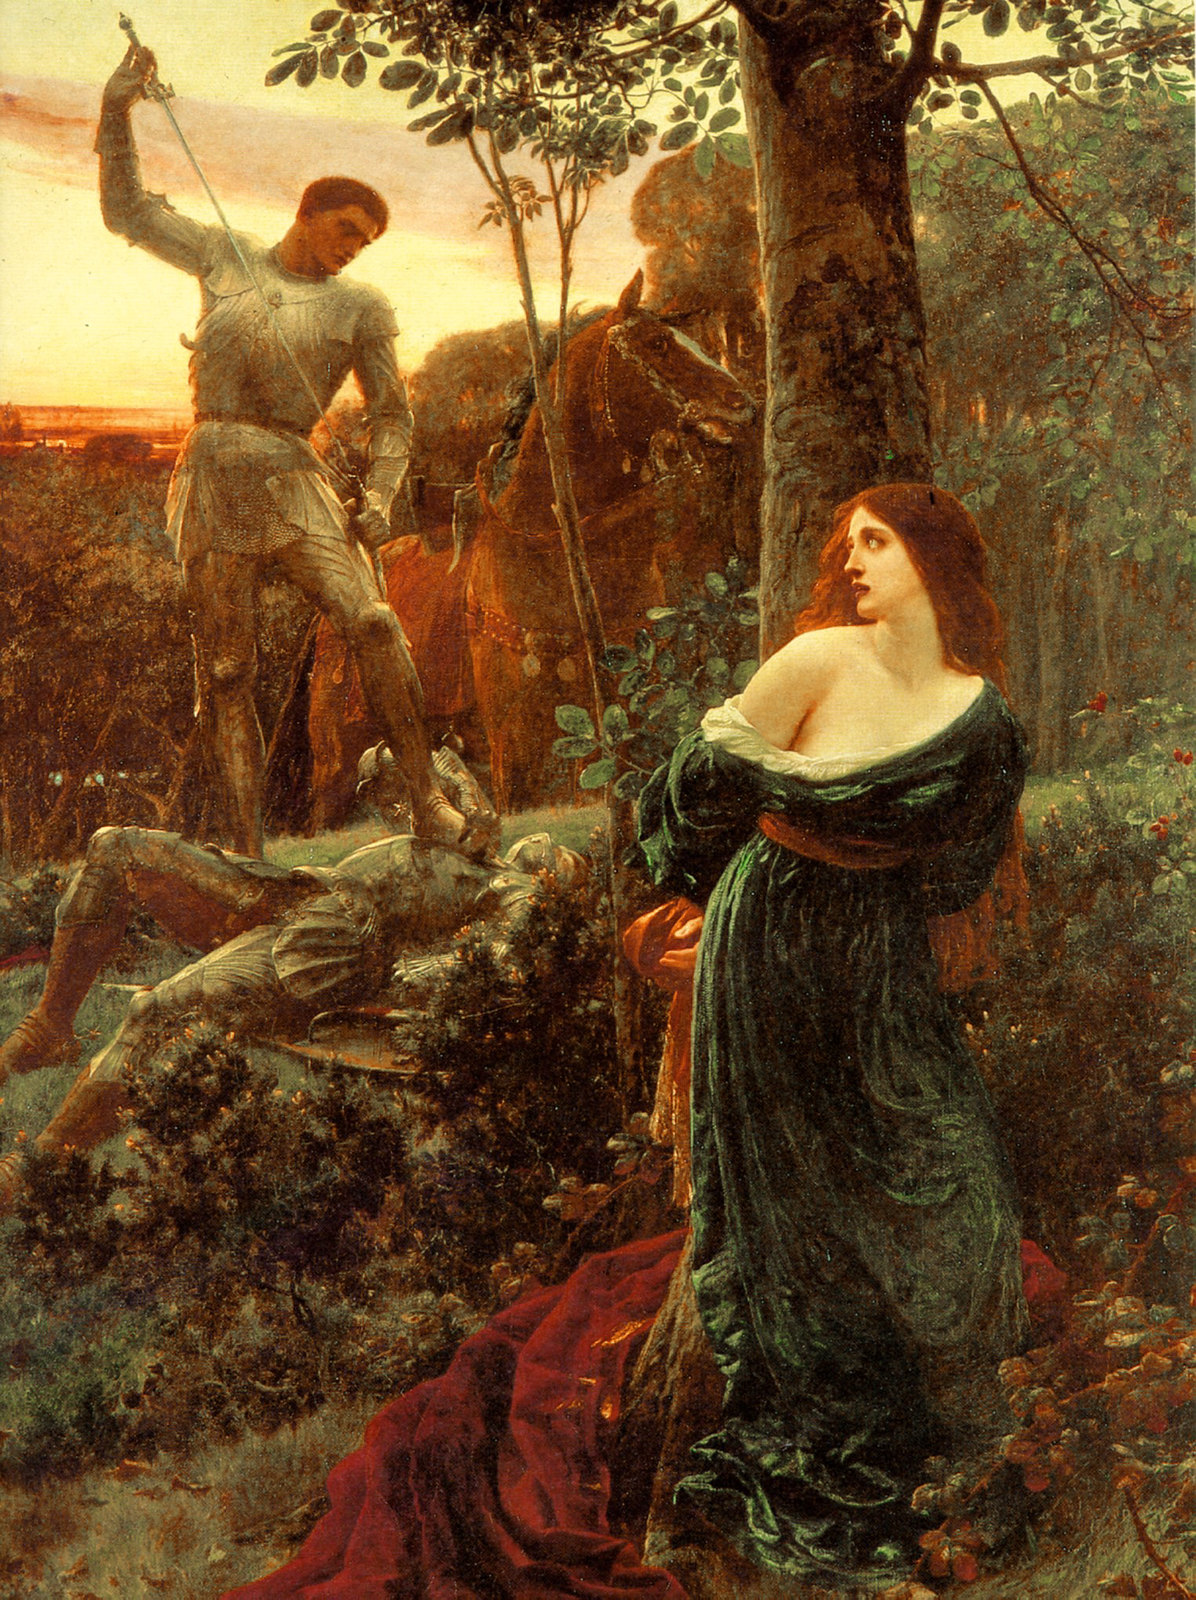 Chivalry by Frank Dicksee, 1885